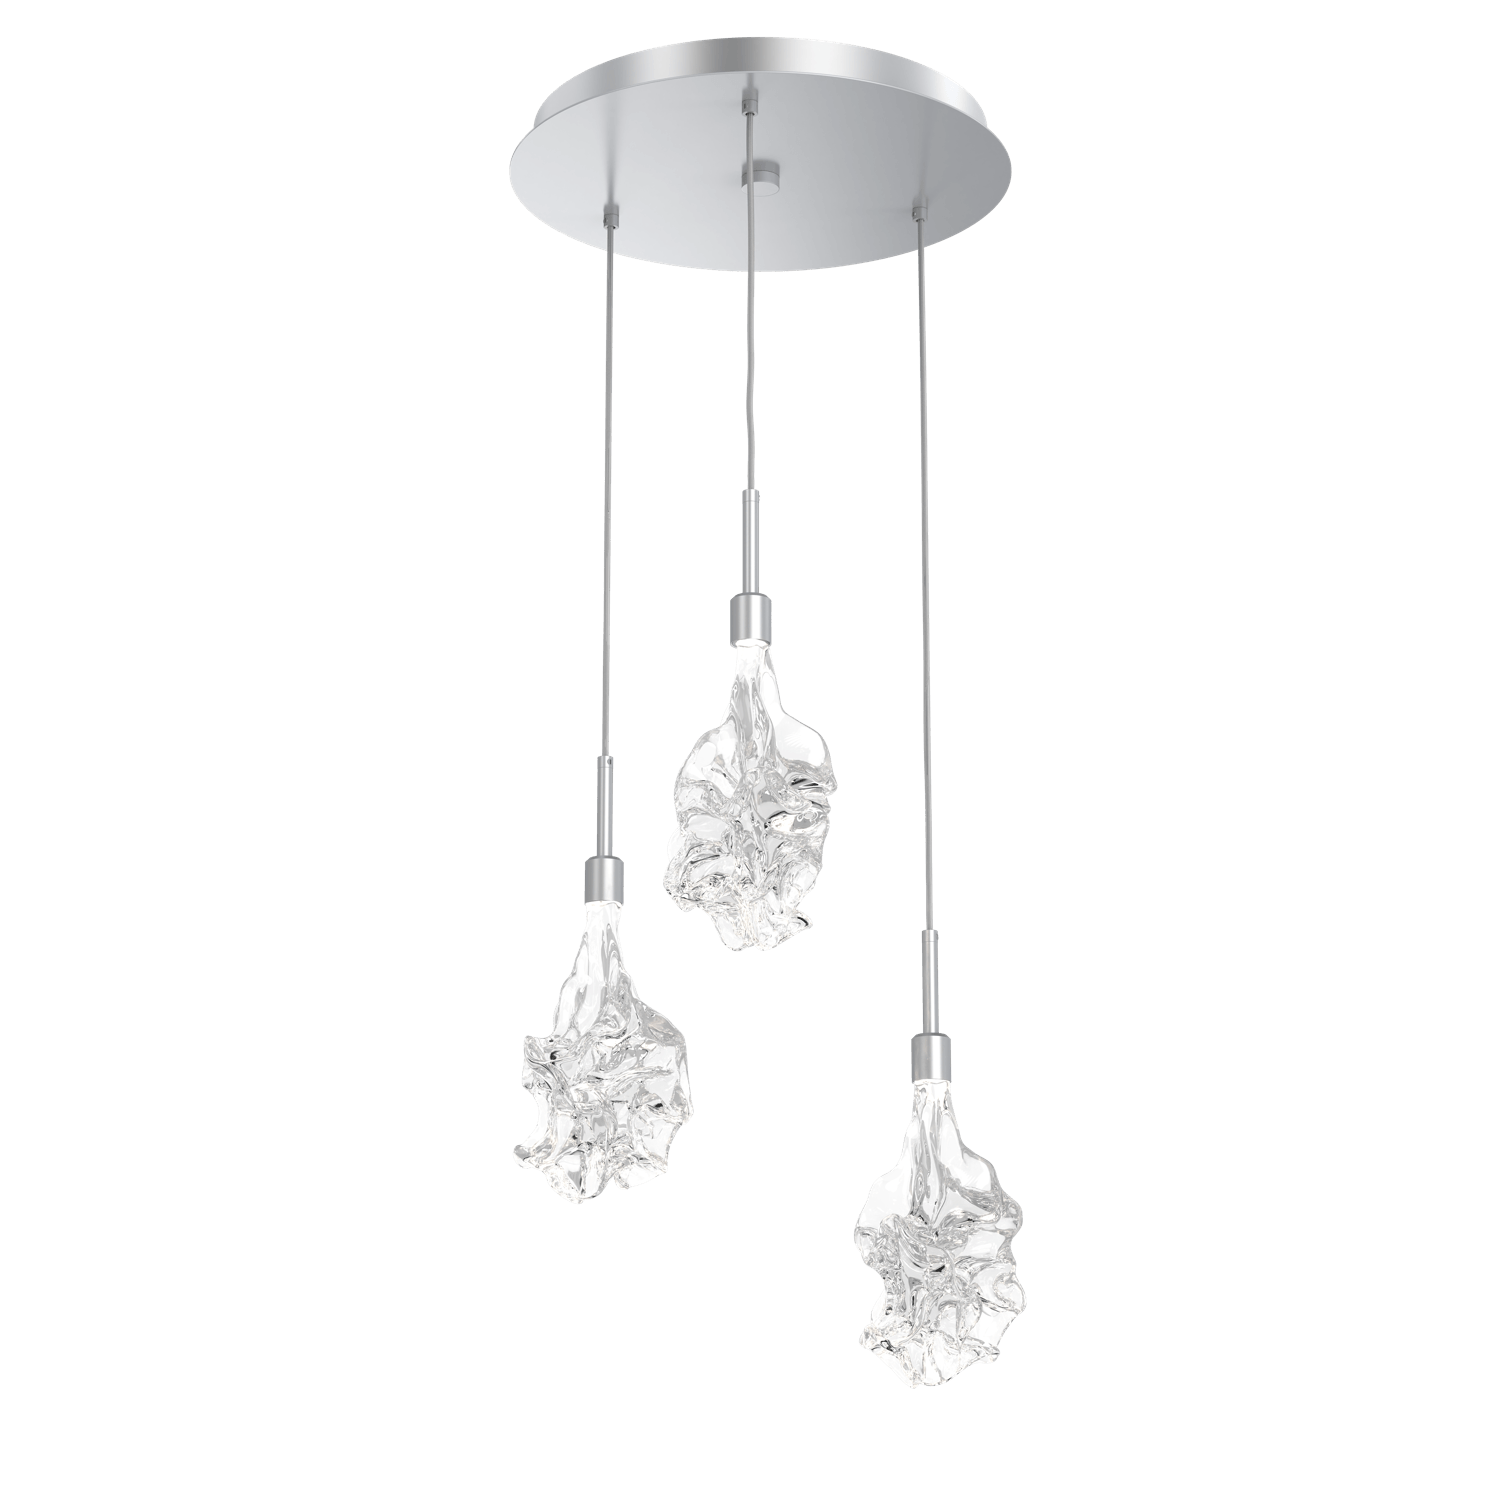 CHB0059-03-CS-Hammerton-Studio-Blossom-3-light-round-pendant-chandelier-with-classic-silver-finish-and-clear-handblown-crystal-glass-shades-and-LED-lamping